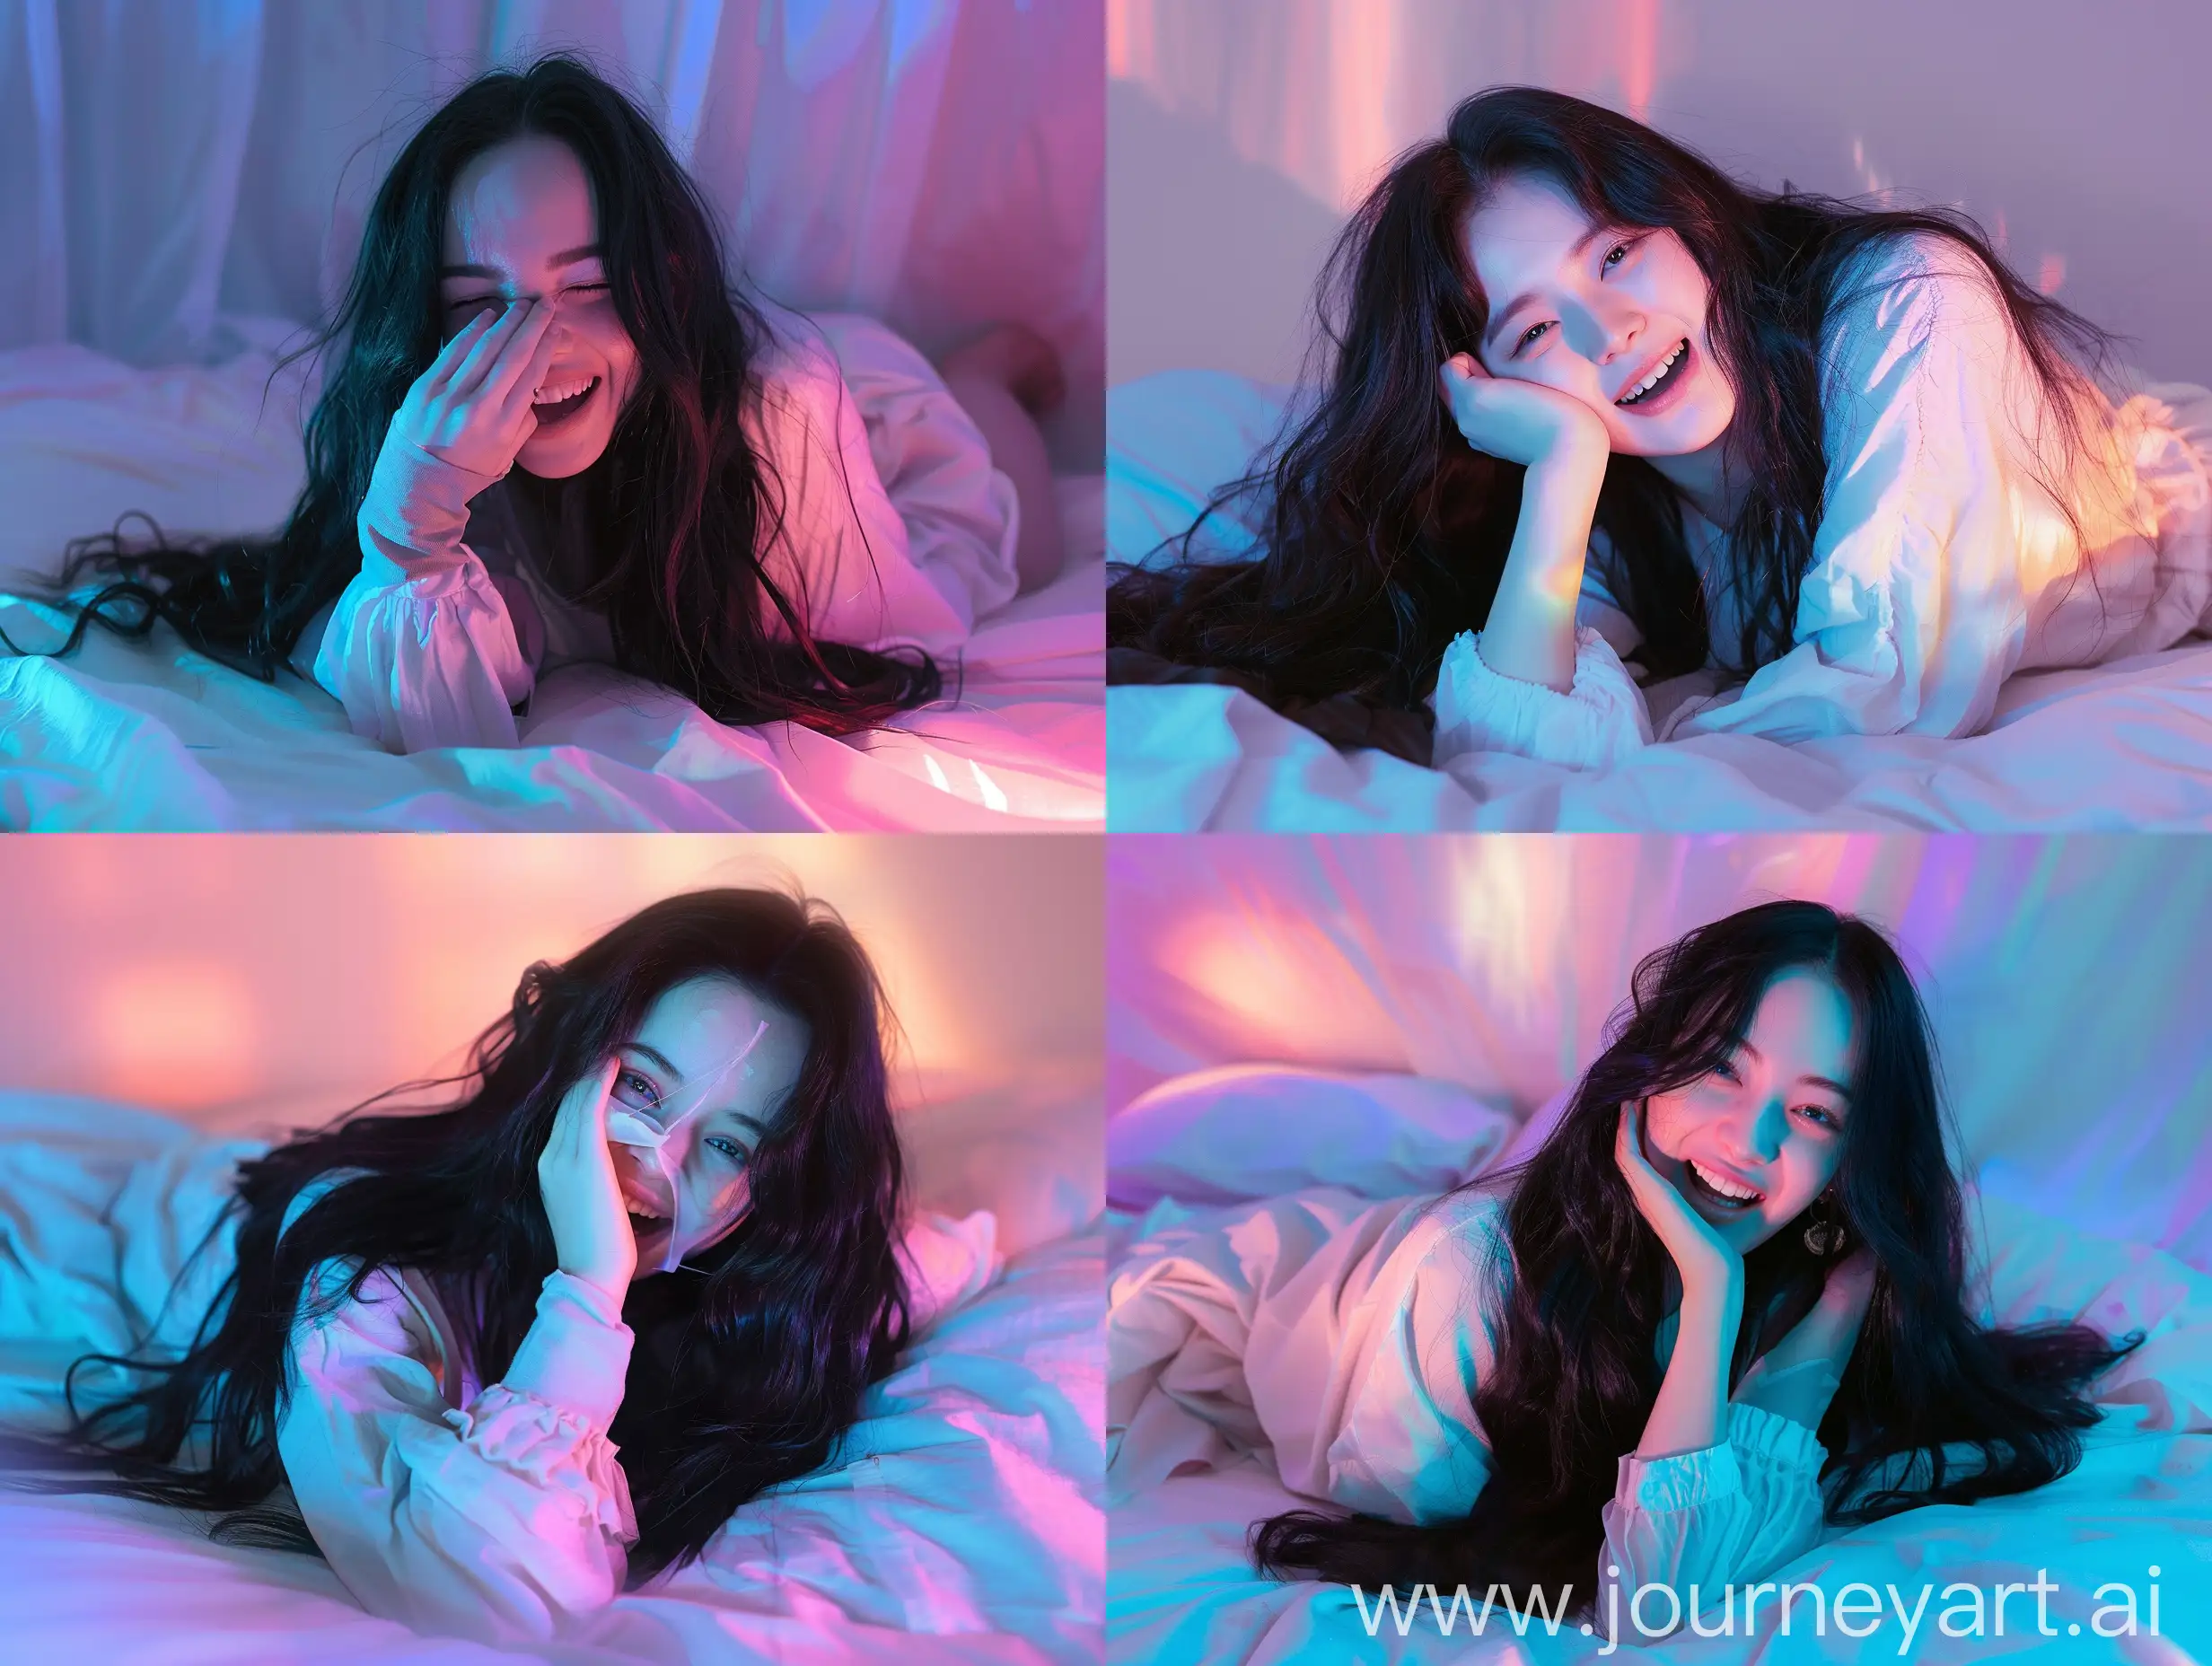 Aesthetic instagram picture real person, girl with long black hair laying on bed laughing covering her mouth with sleeve covering her hand in pastel lighting 